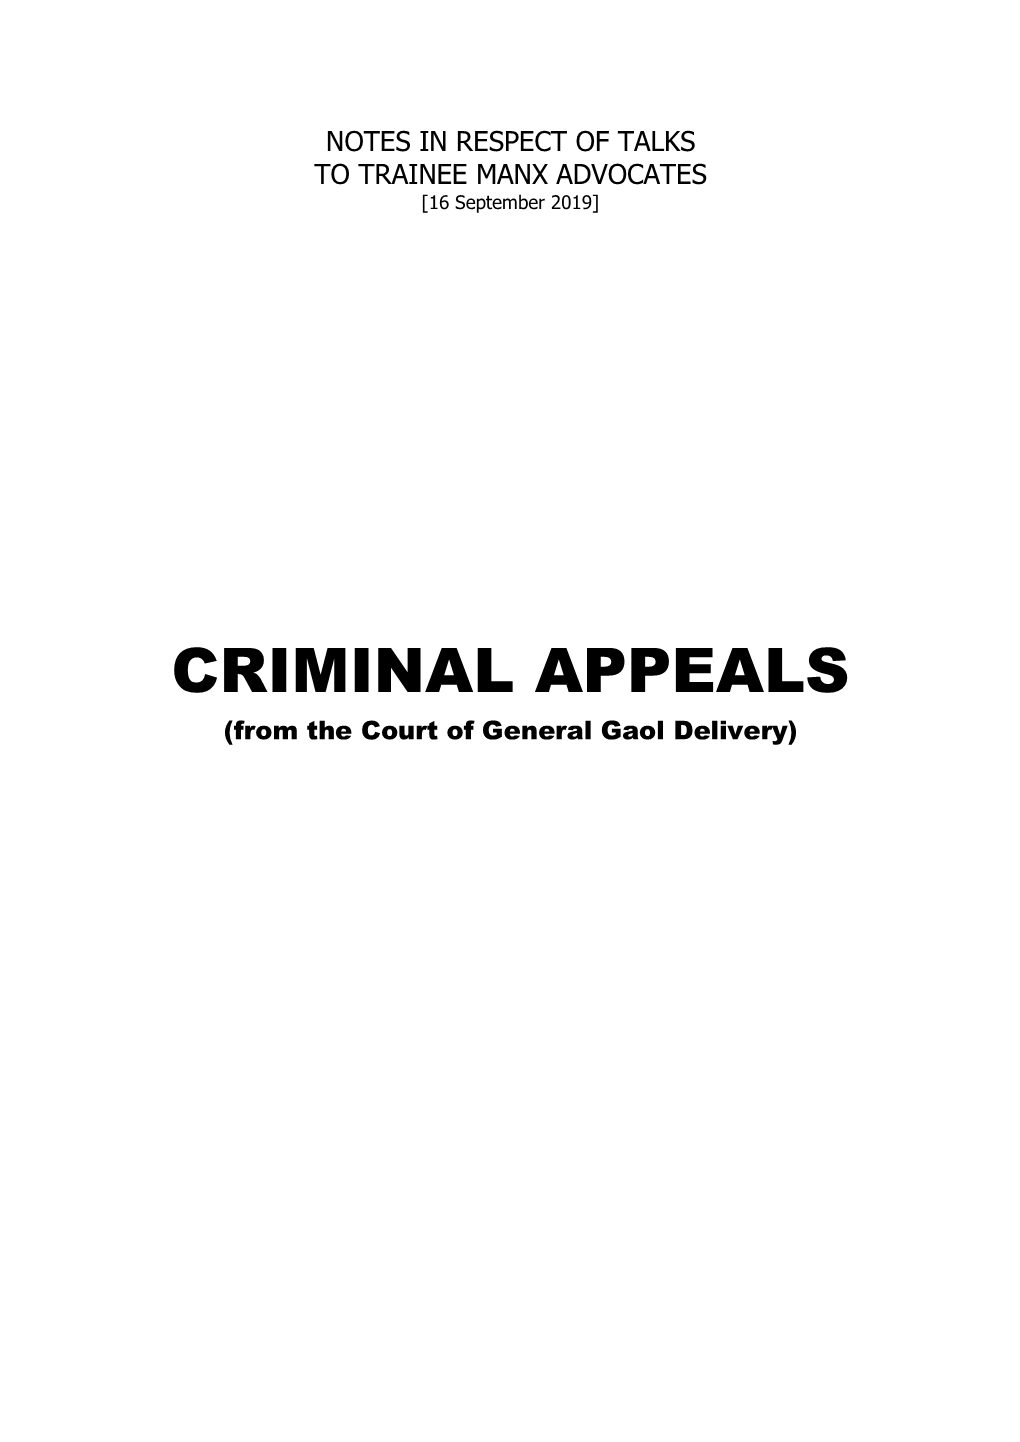 CRIMINAL APPEALS (From the Court of General Gaol Delivery)